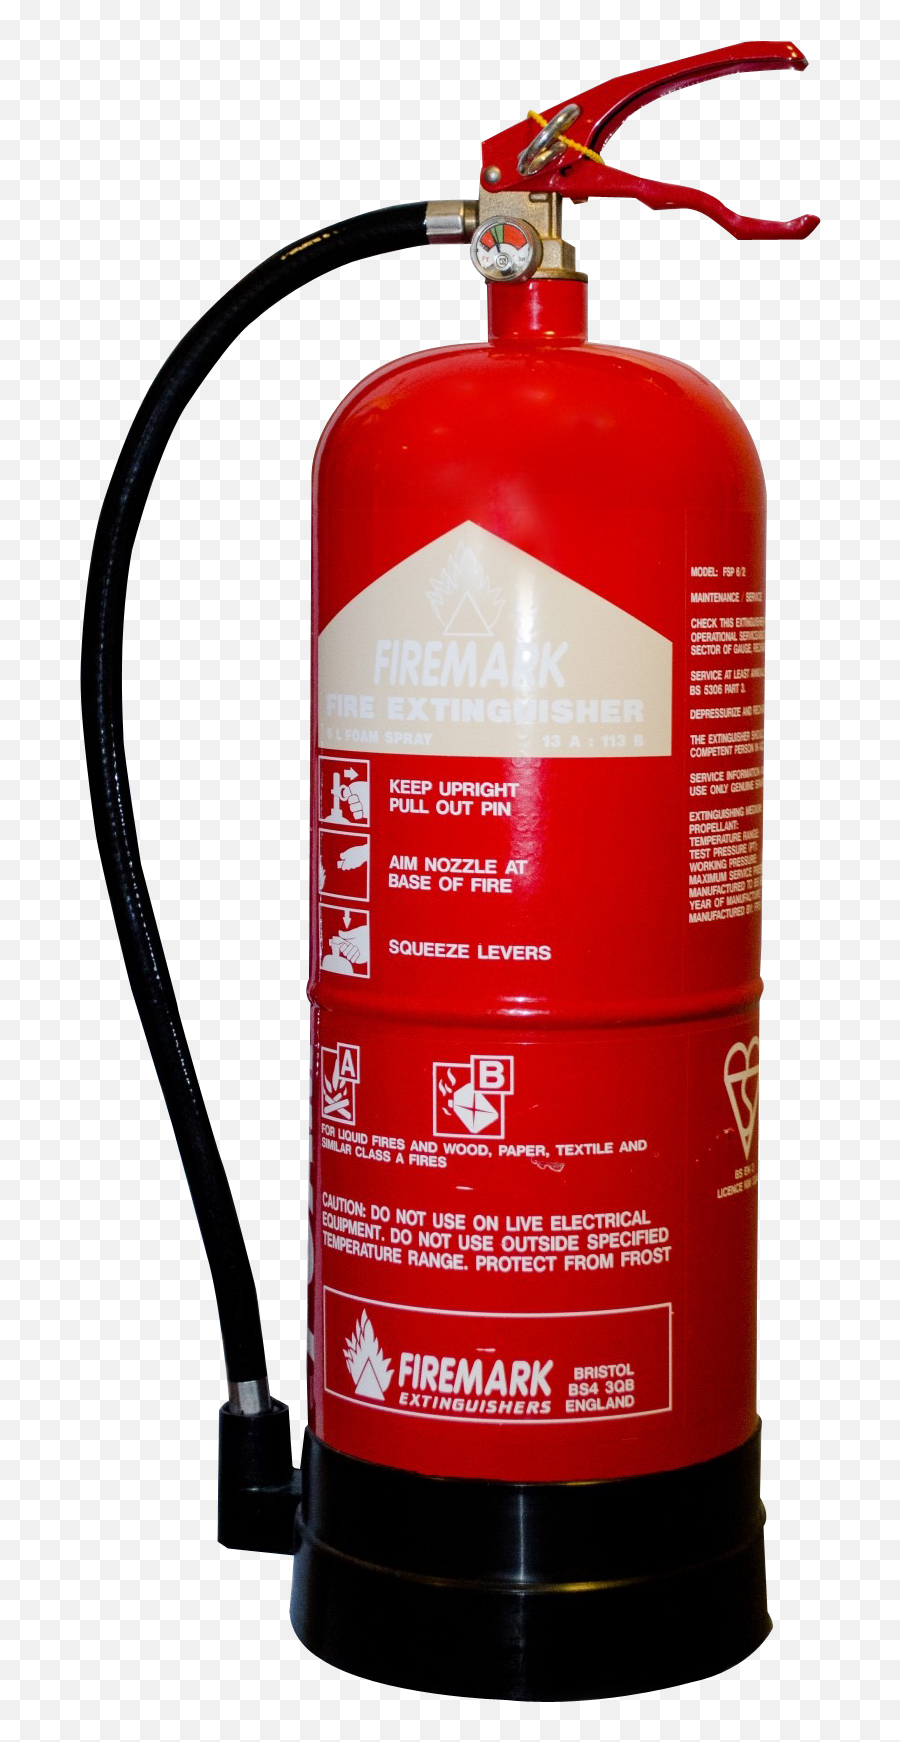 Fire Extinguisher Png Image - Fire Extinguisher Image Png Emoji,Fire Extinguisher Clipart